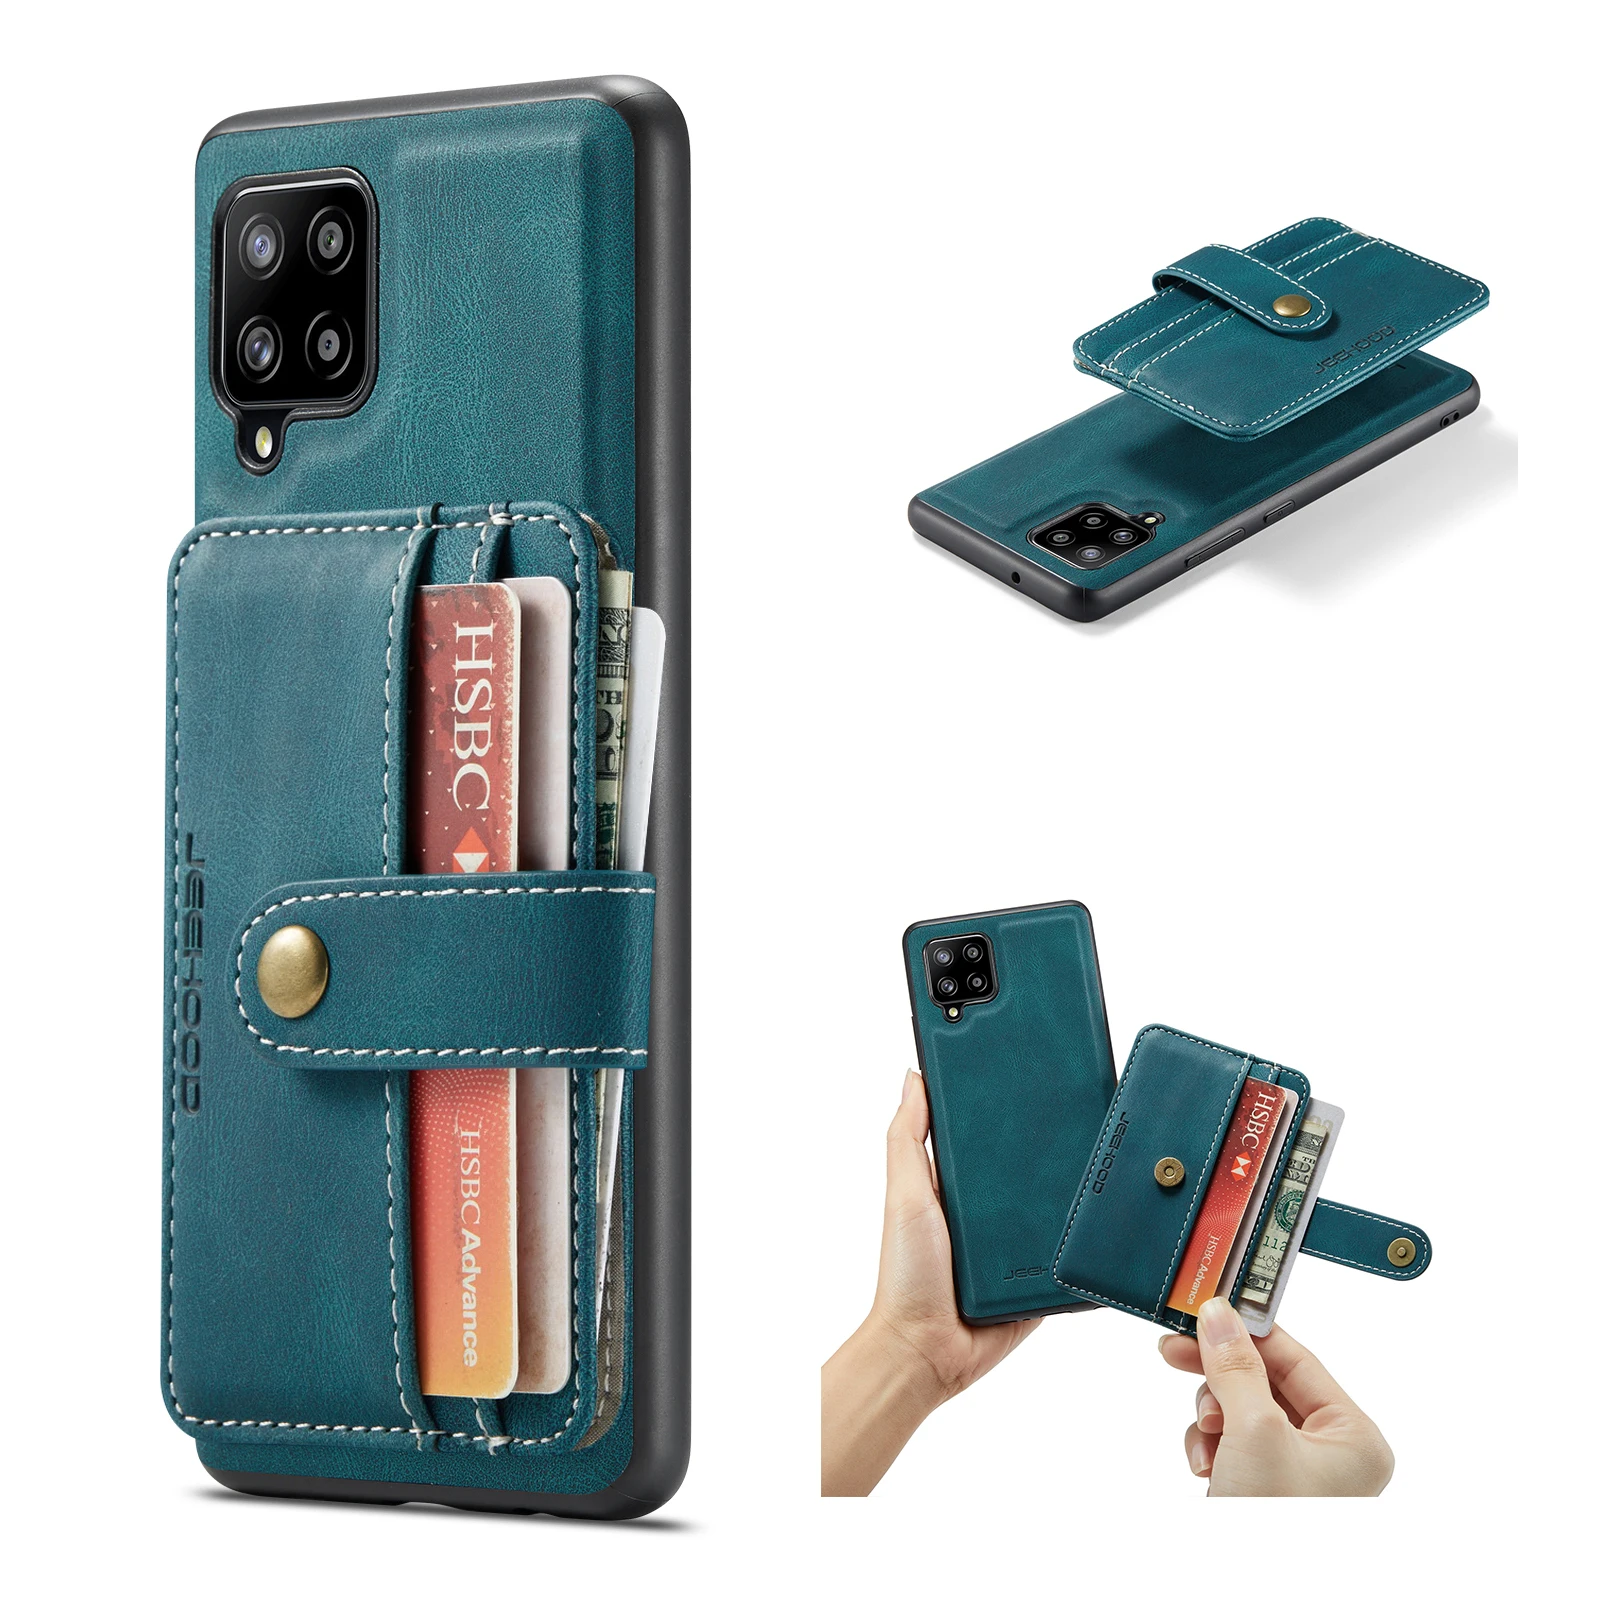 

Leather Wallet Case For Samsung Galaxy A42 A32 A22 A12 A52 A72 A82 A11 A21 A31 A41 A51 A71 A70 A50 A40 A30 A20 A10 Phone Cover 1